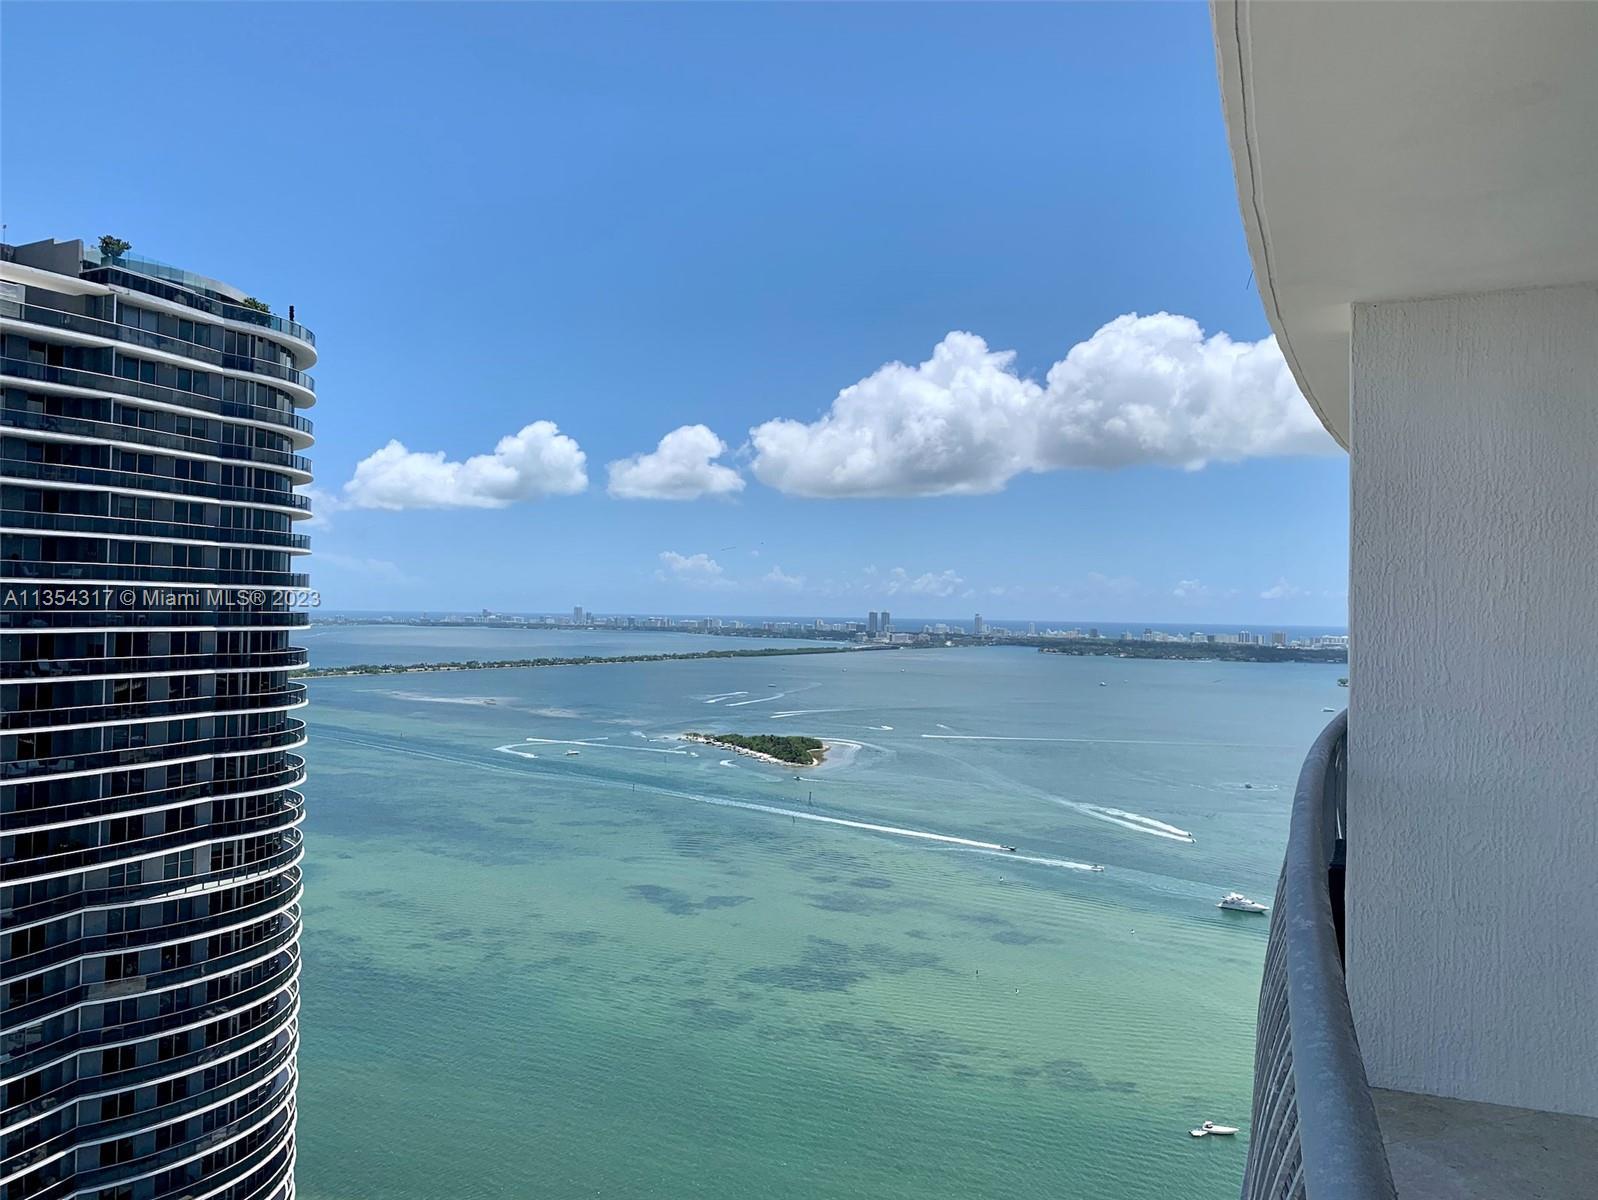 Located in one of the best neighborhood in Miami, you will love this large and bright condo with an 